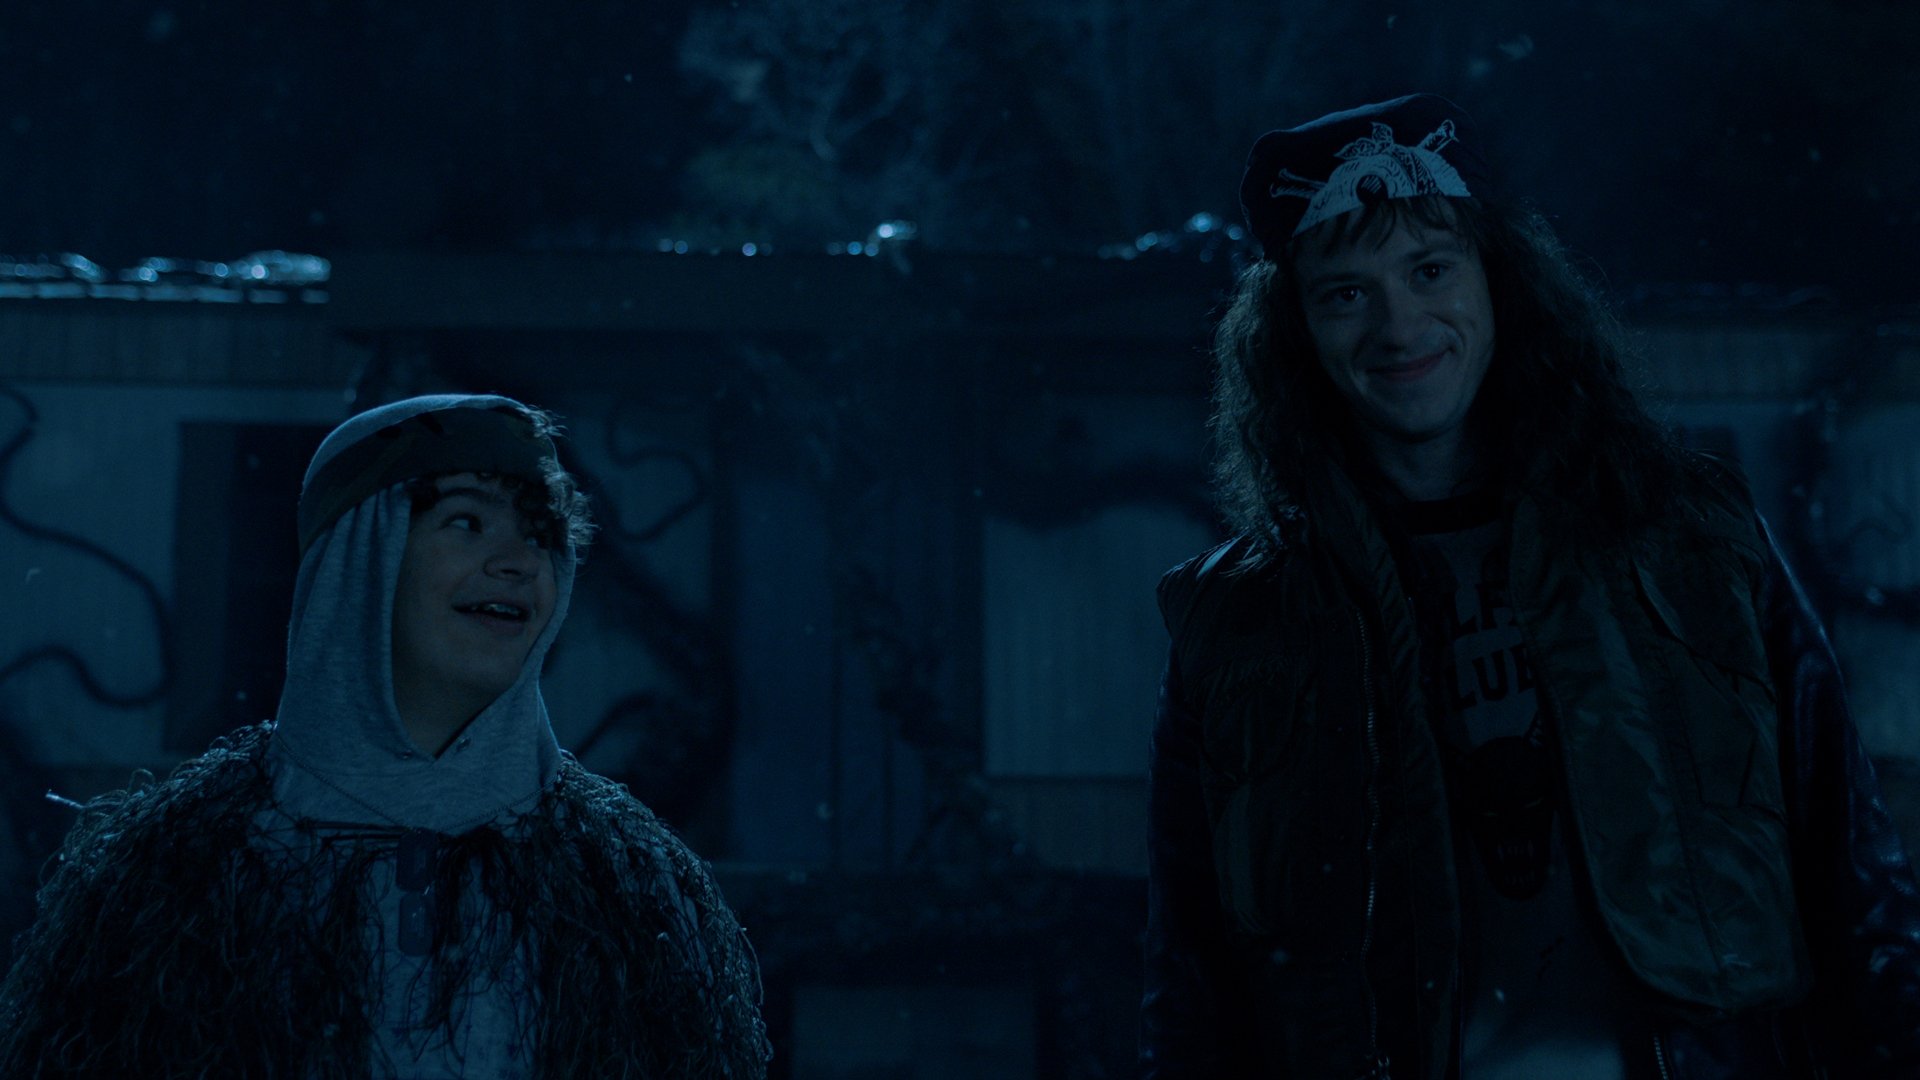 Two teens stand in a grim, blue-lit world but still smiling.